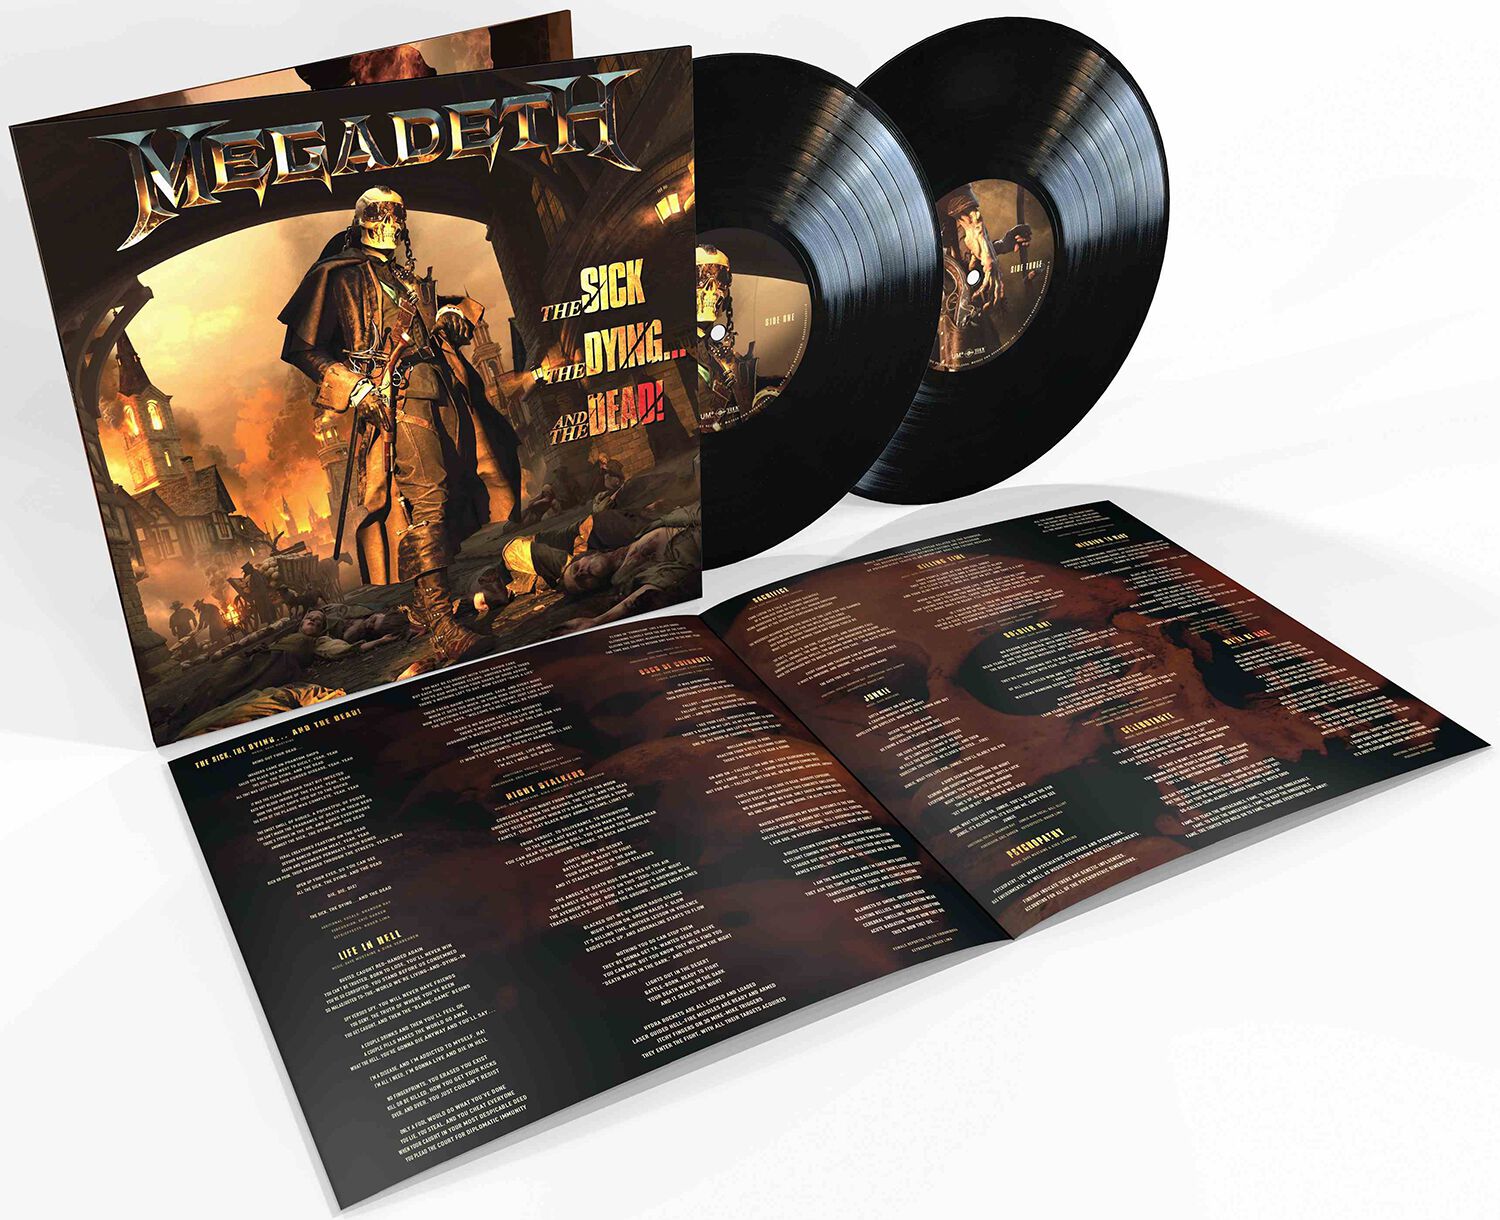 Megadeth The sick, the dying... and the dead! LP multicolor von Megadeth